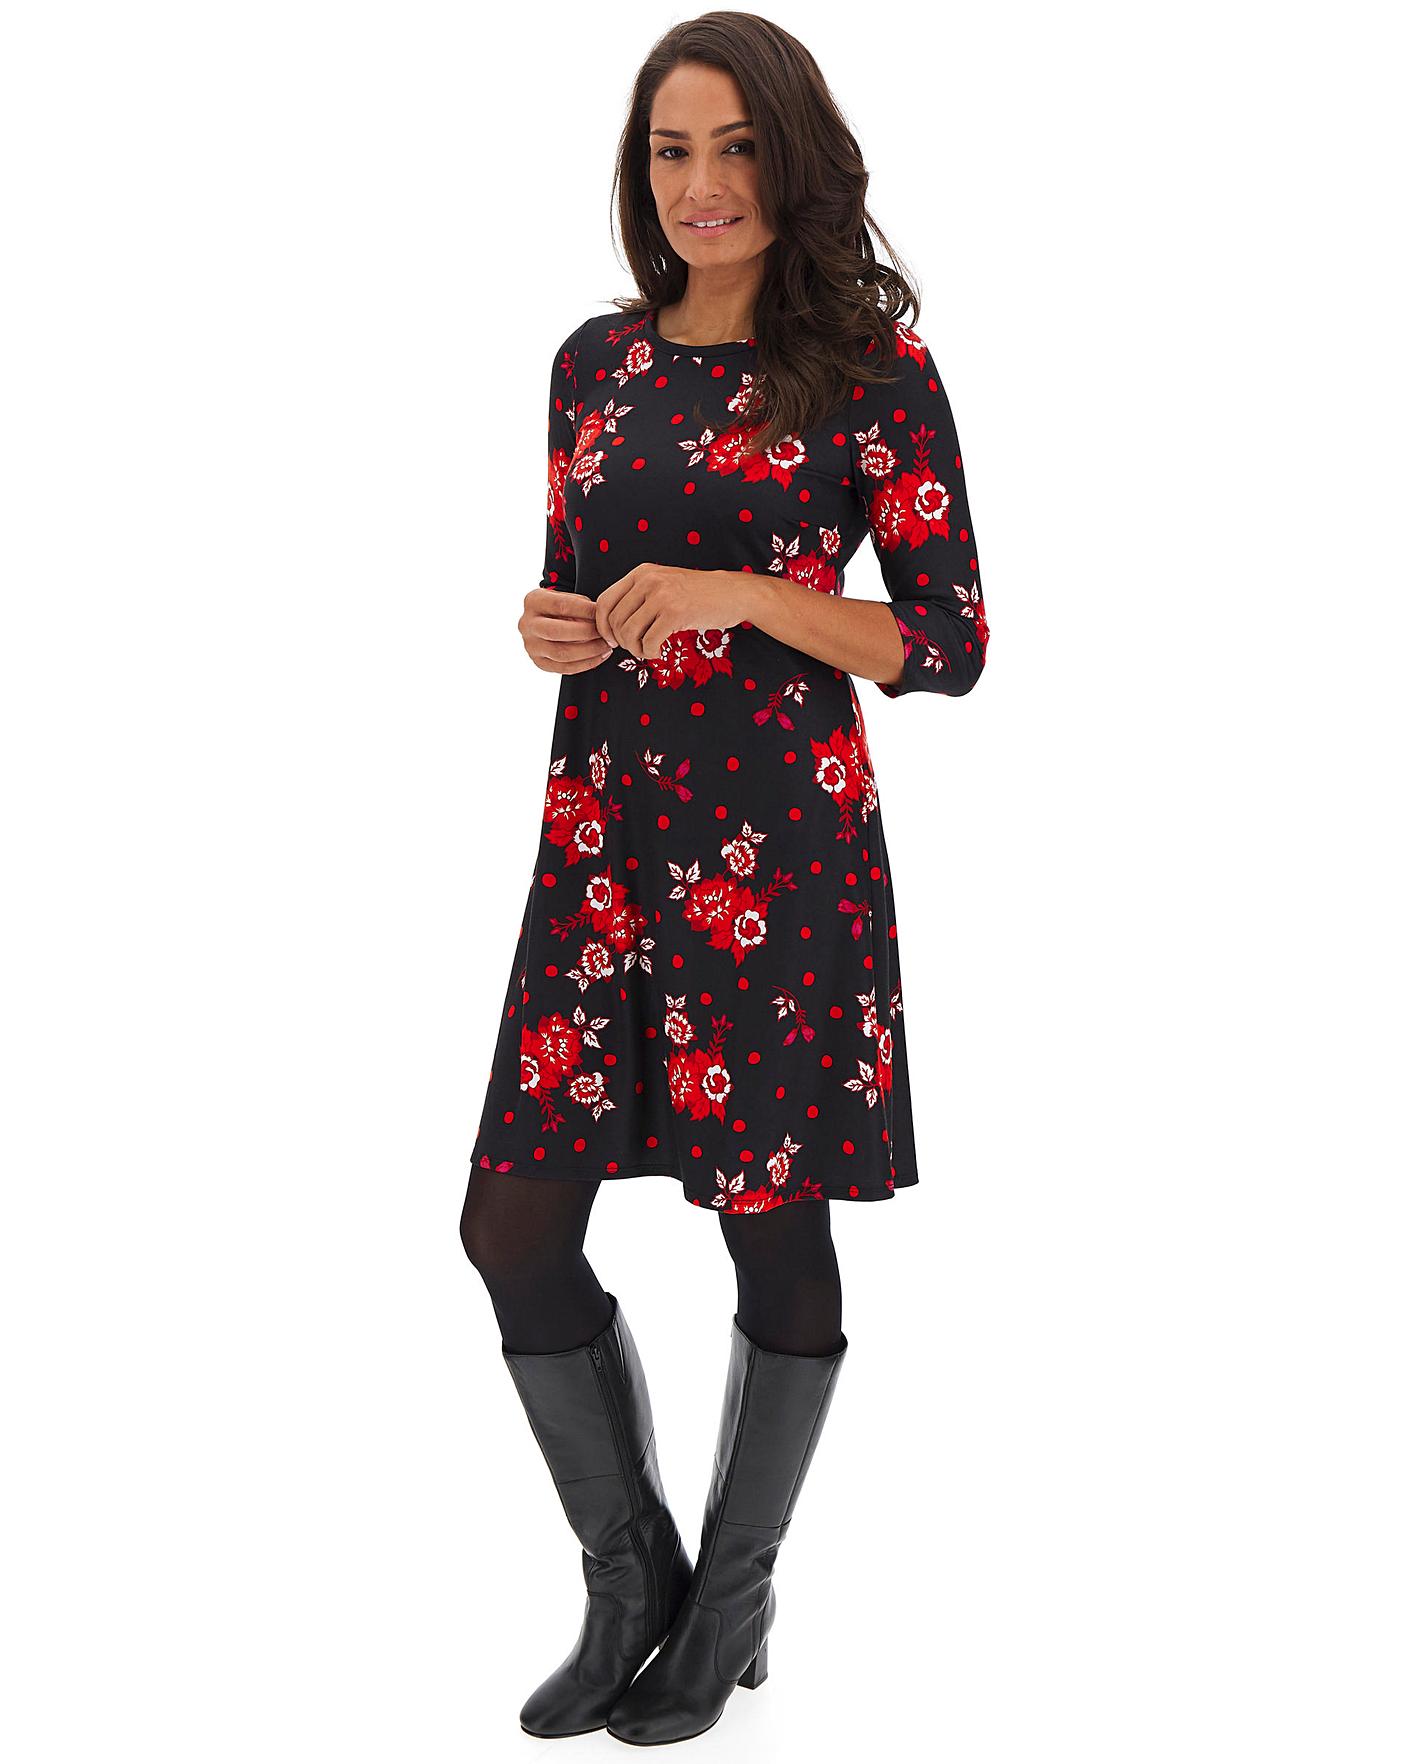 floral dress with knee high boots